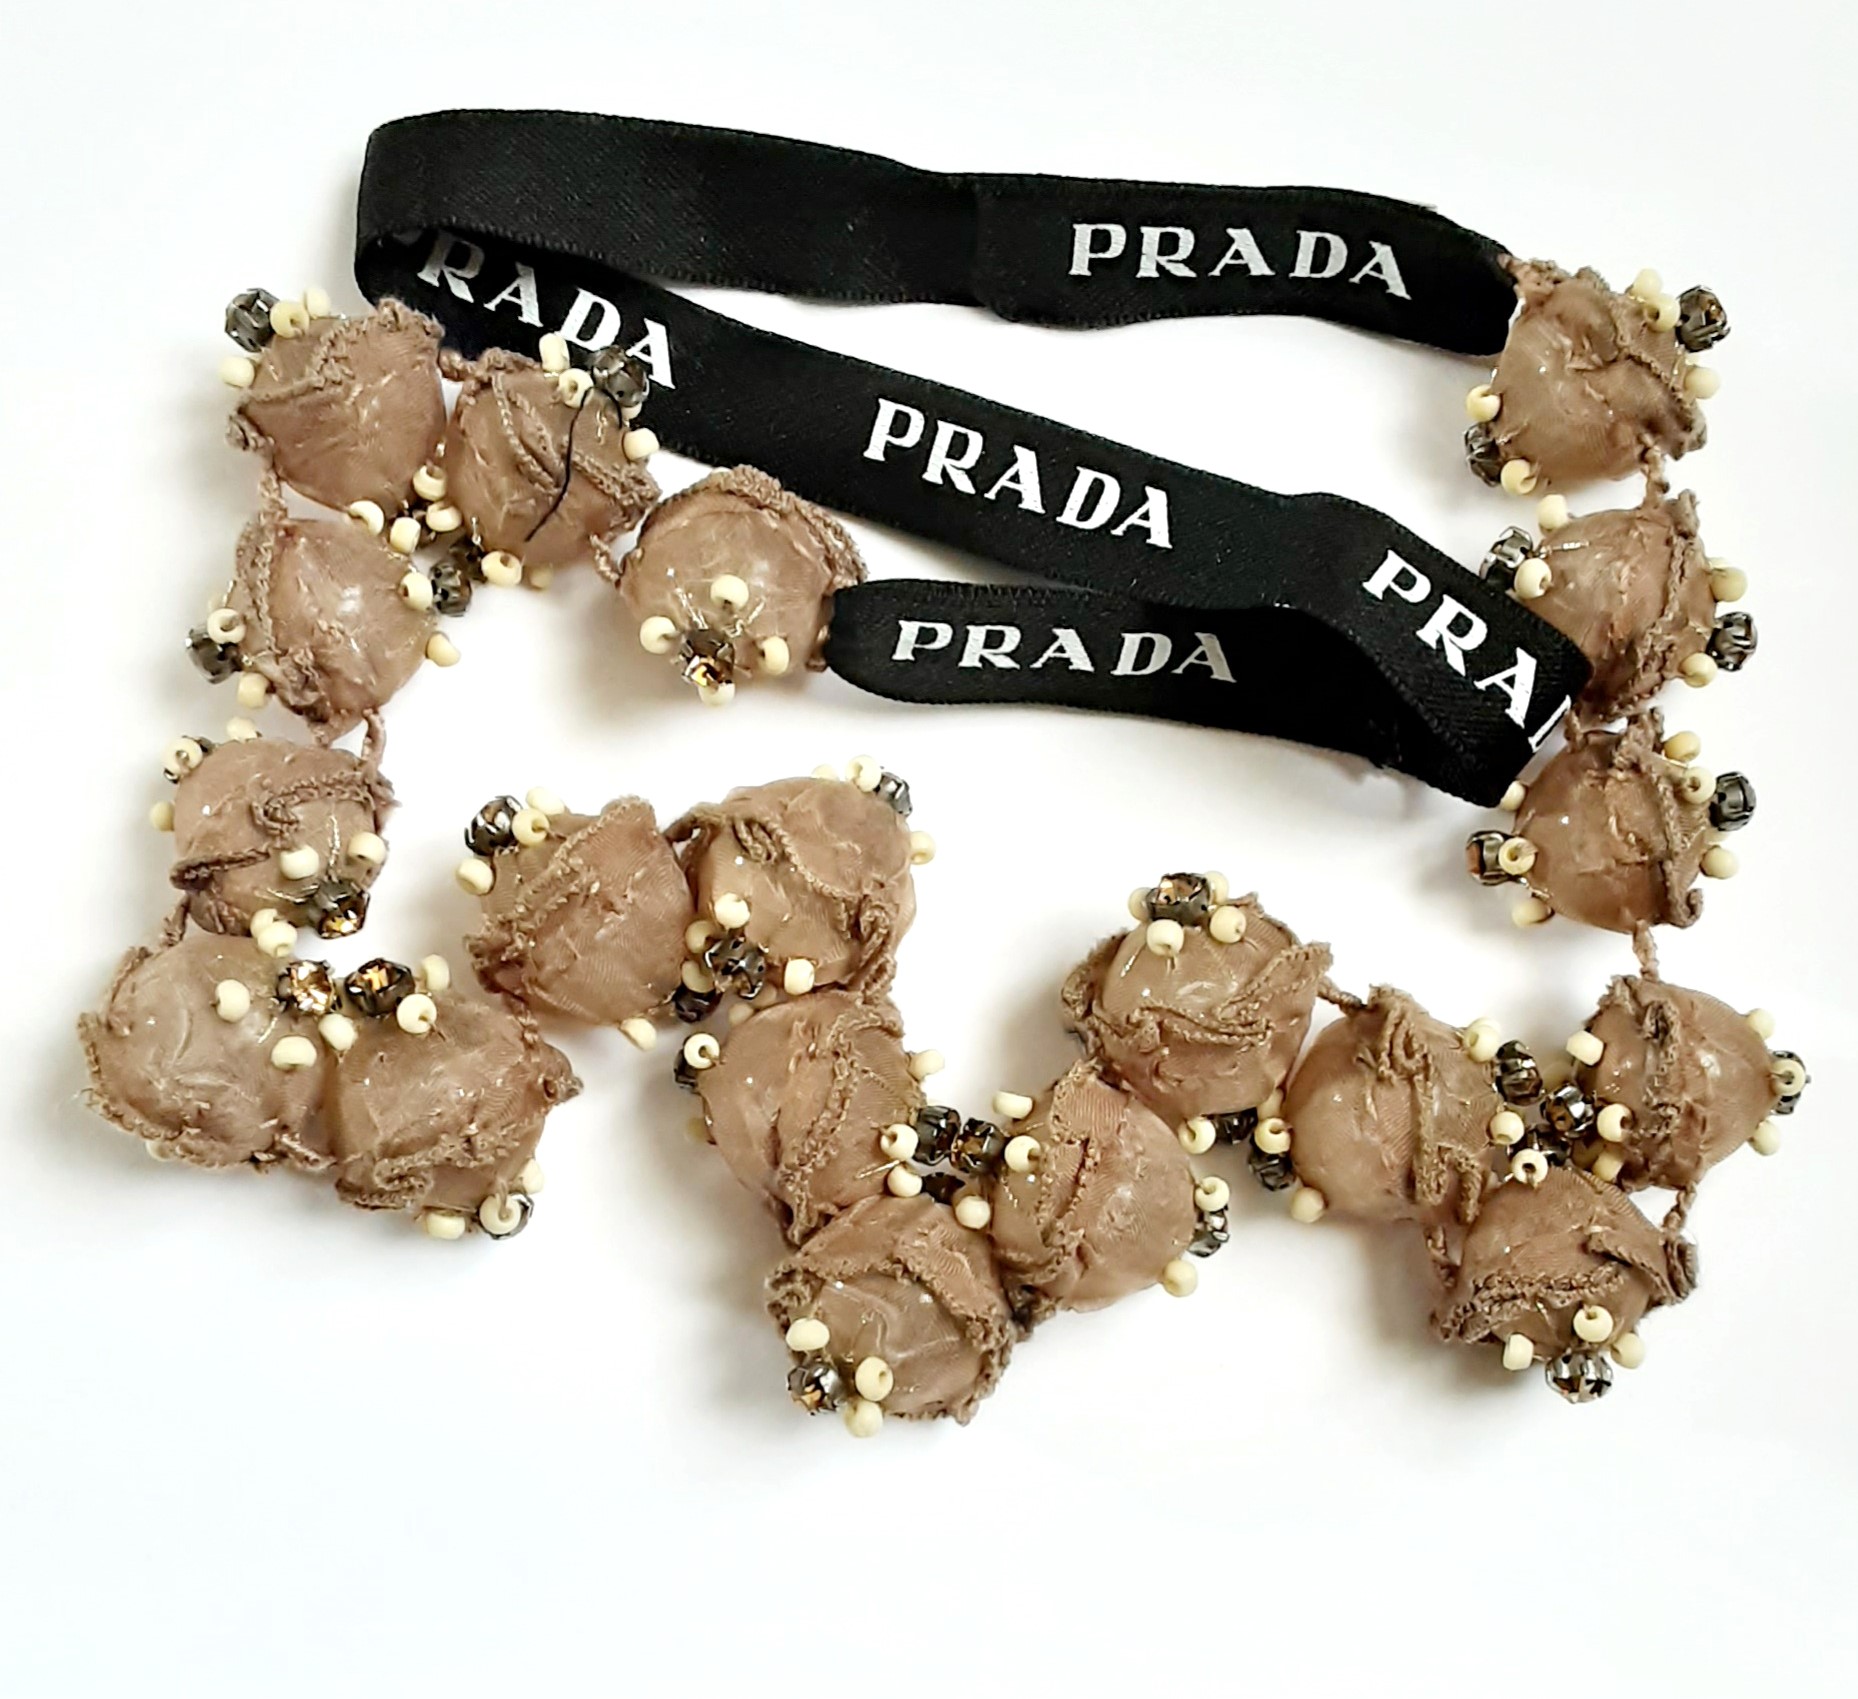 Prada covered and embellished bead necklace